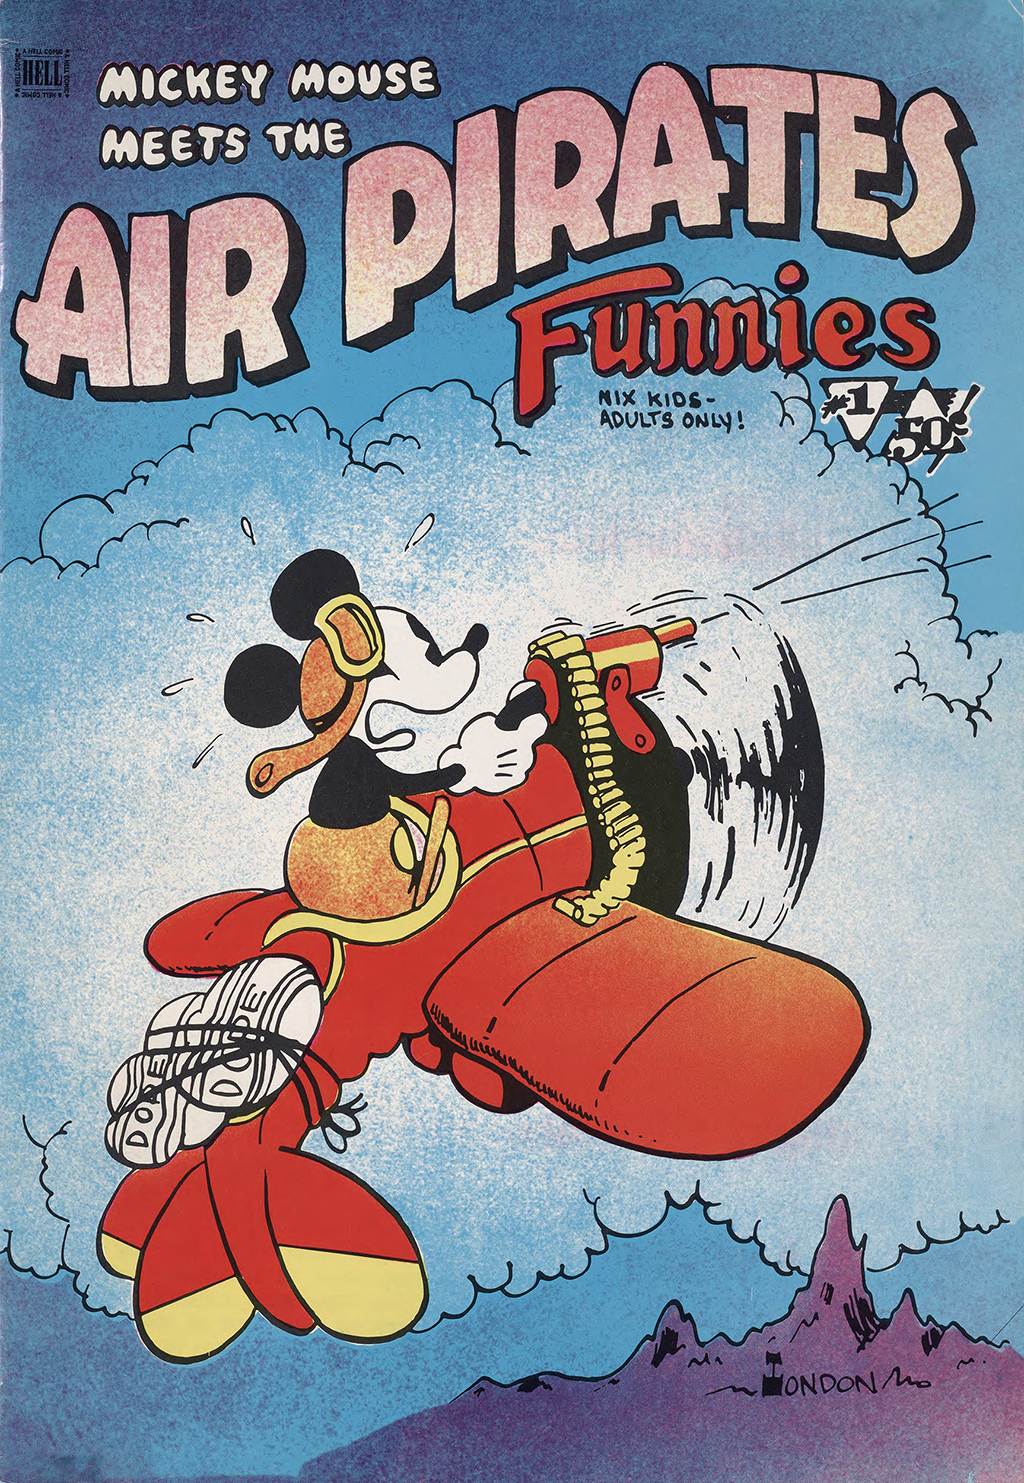 Cover of Mickey Mouse Meets the Air Pirates Funnies